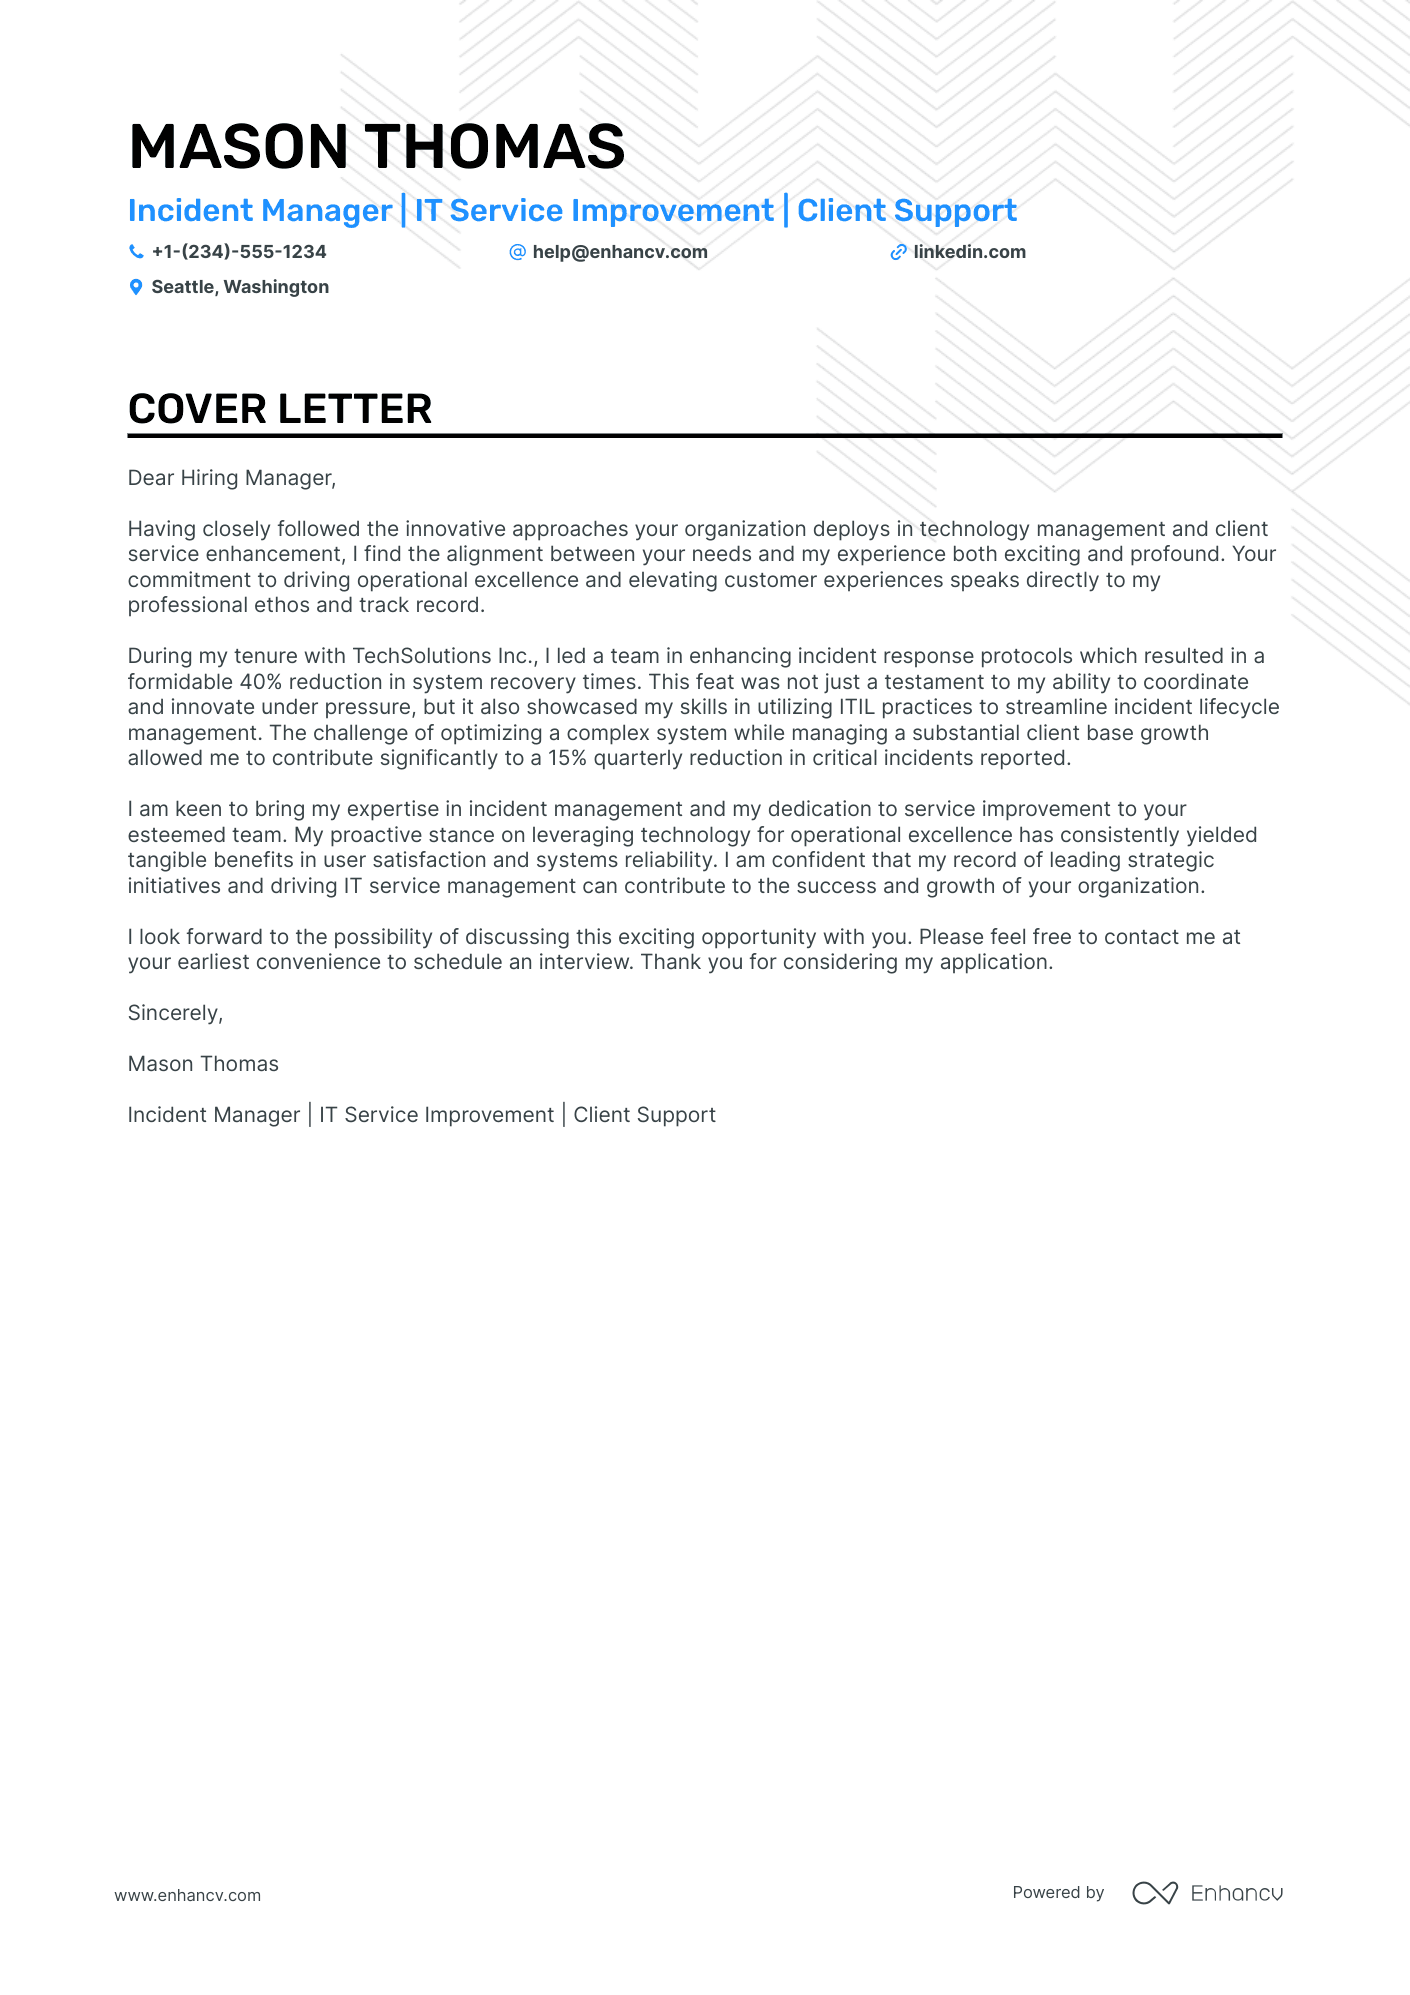 Incident Manager cover letter